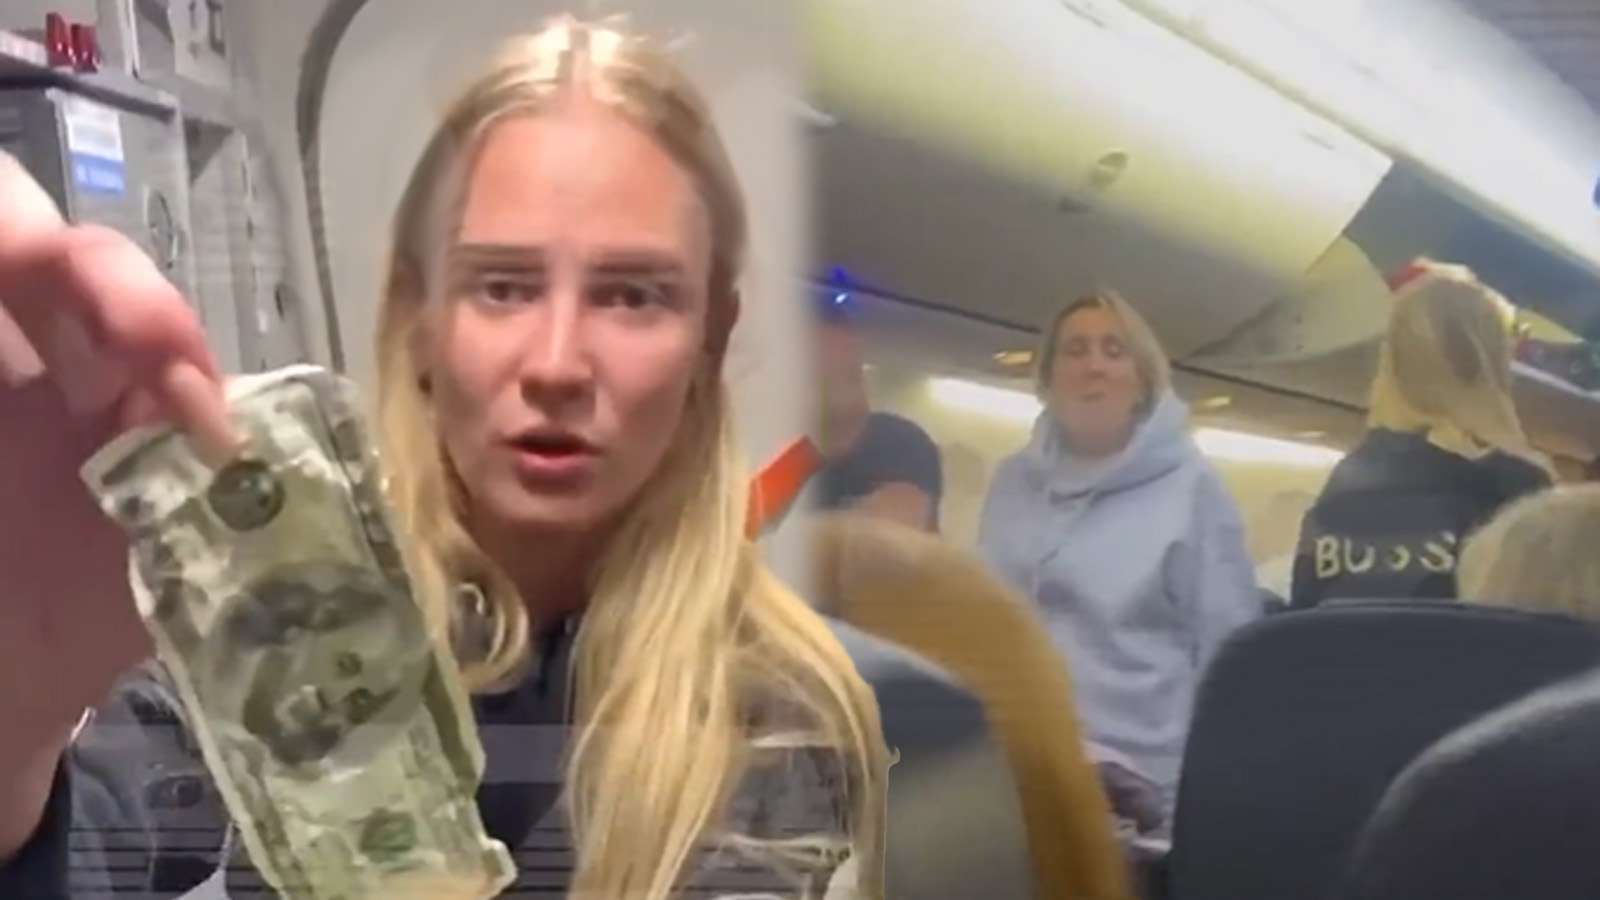 Airline passenger fined $5 after she sexually assaulted man in front of flight attendants